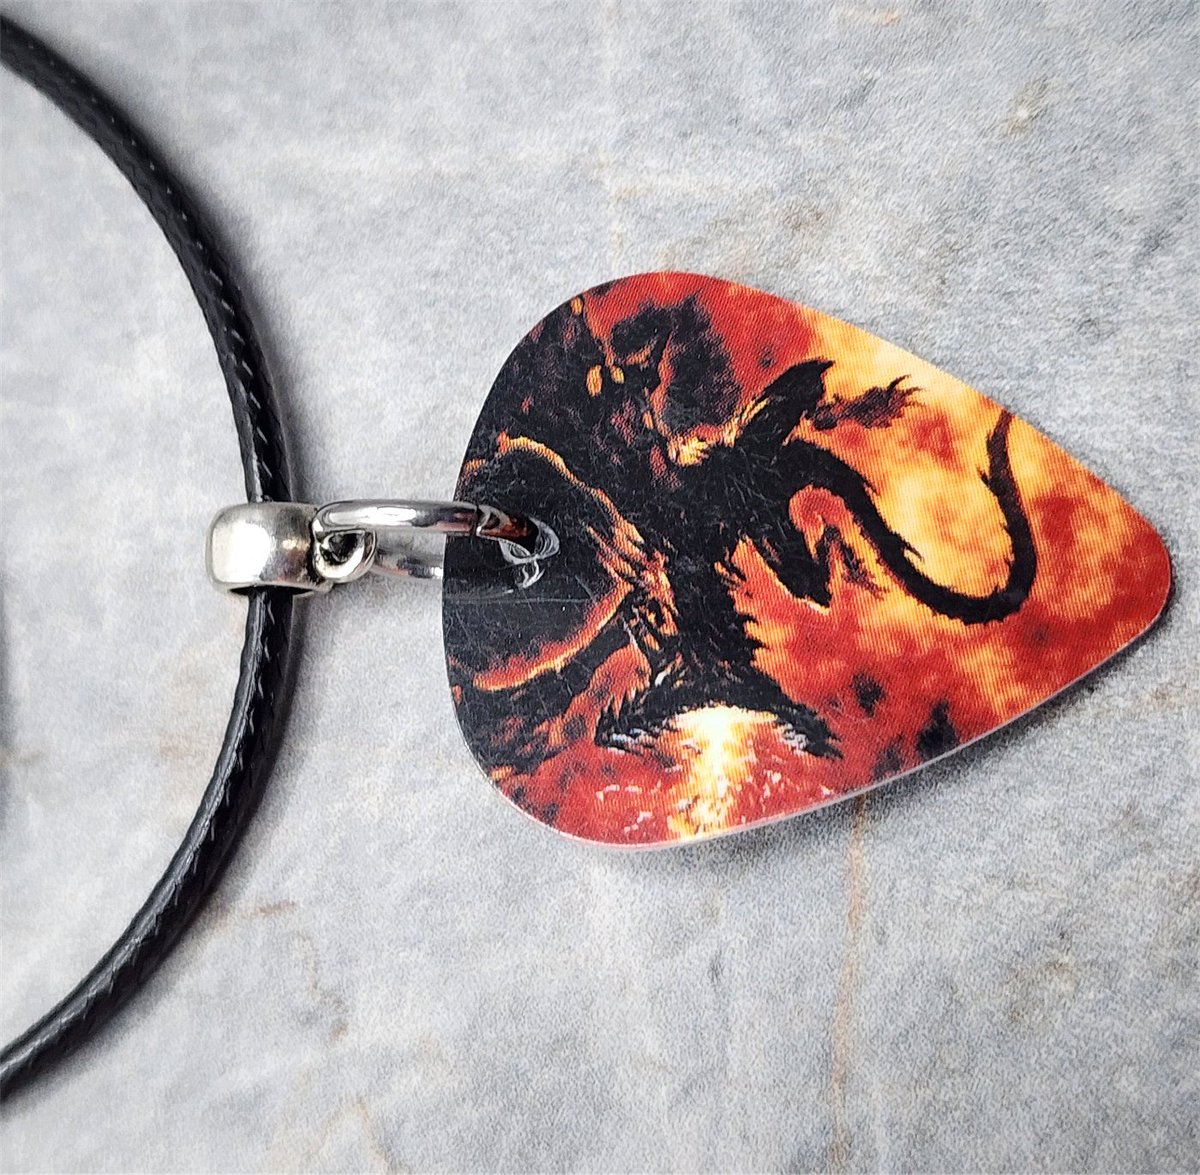 For all of your dragon needs!

#mhhsbd #shopsmall #smallbiz #necklace #dragon #guitar

simplyraevyn.com/products/drago…